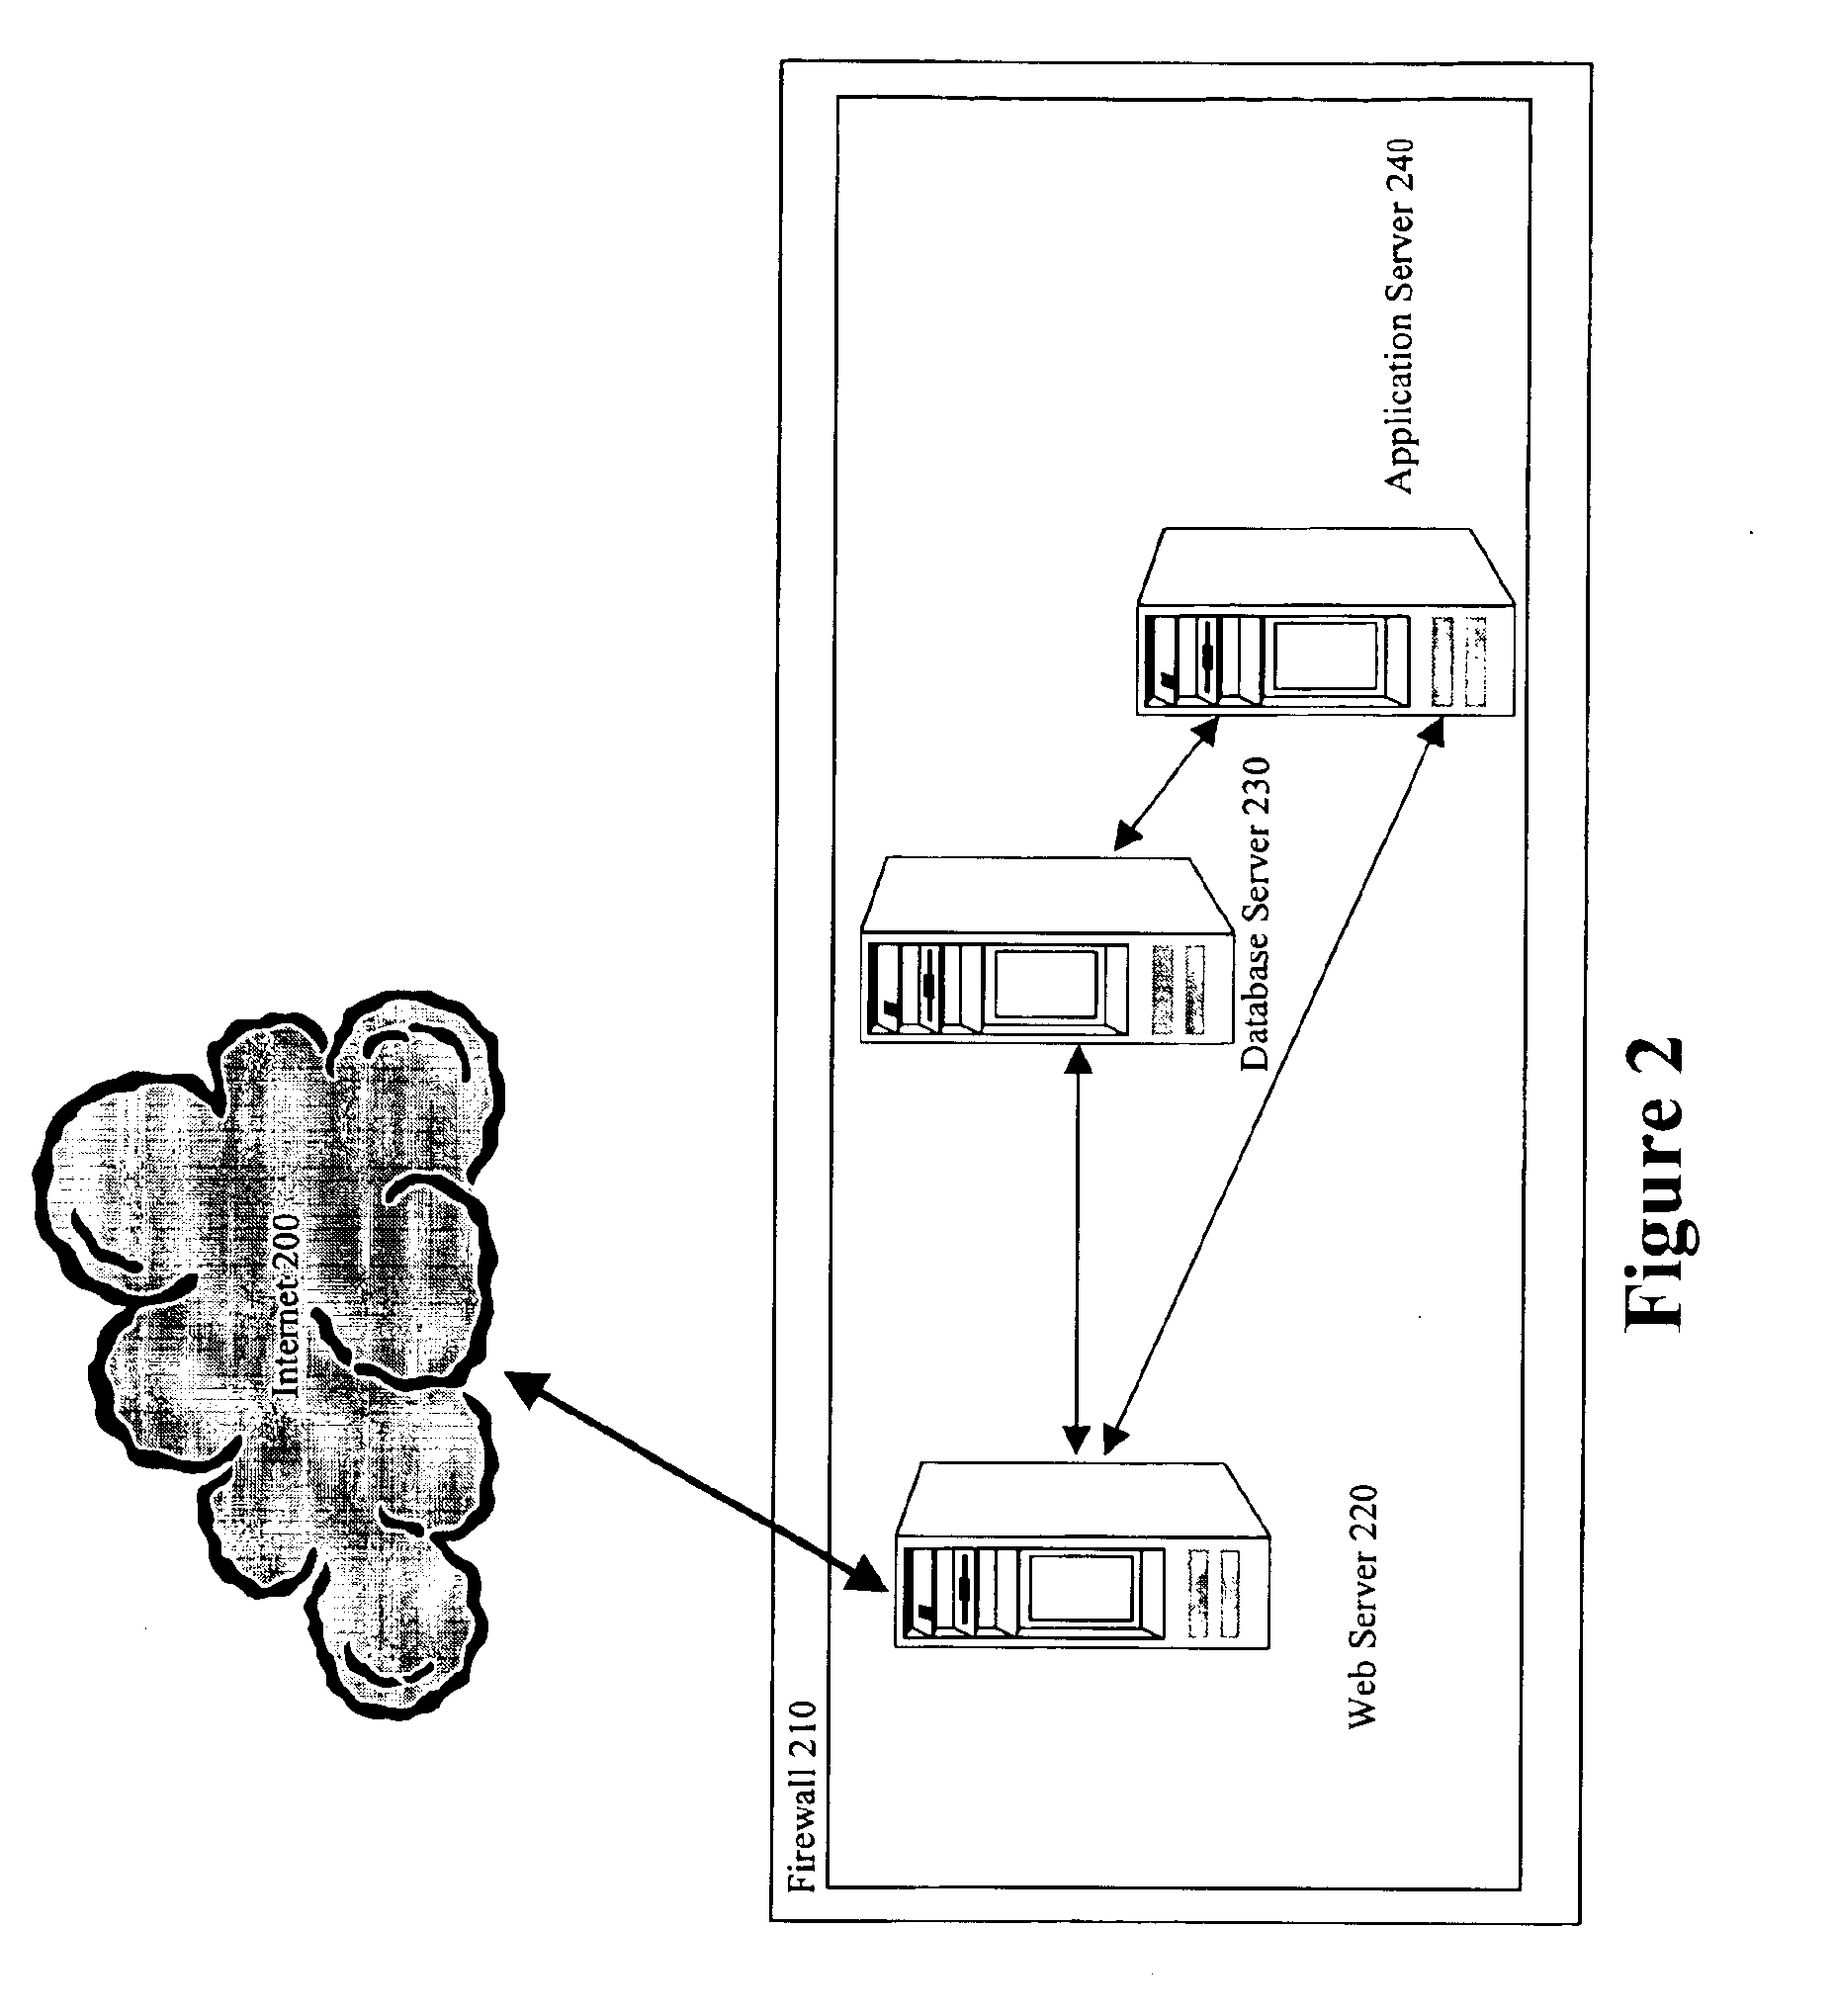 Inventory control system and methods